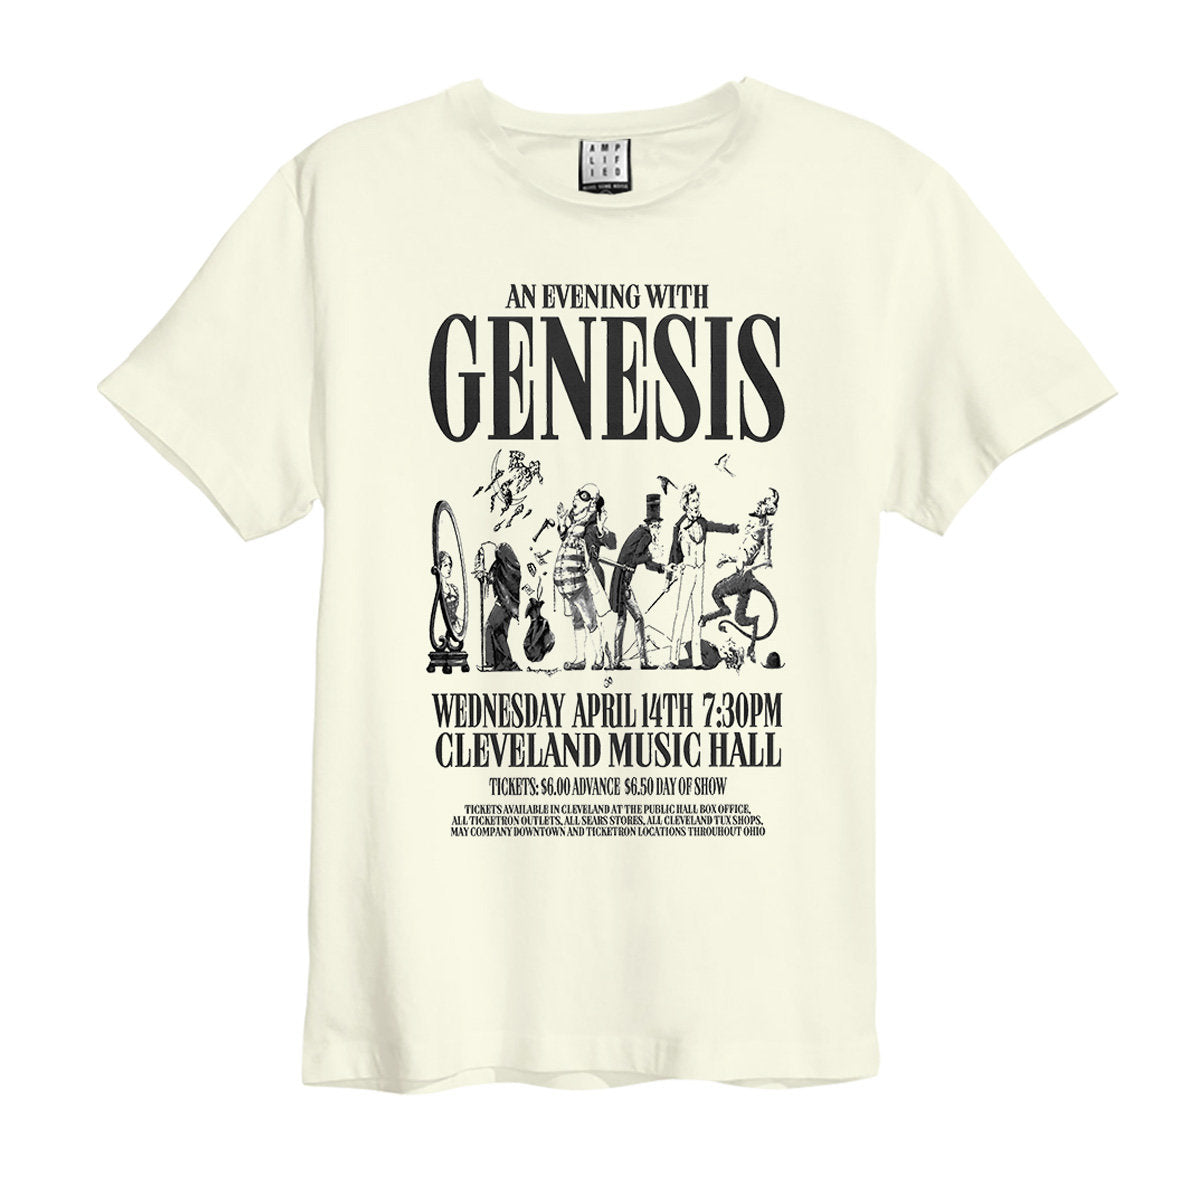 Genesis - An Evening With